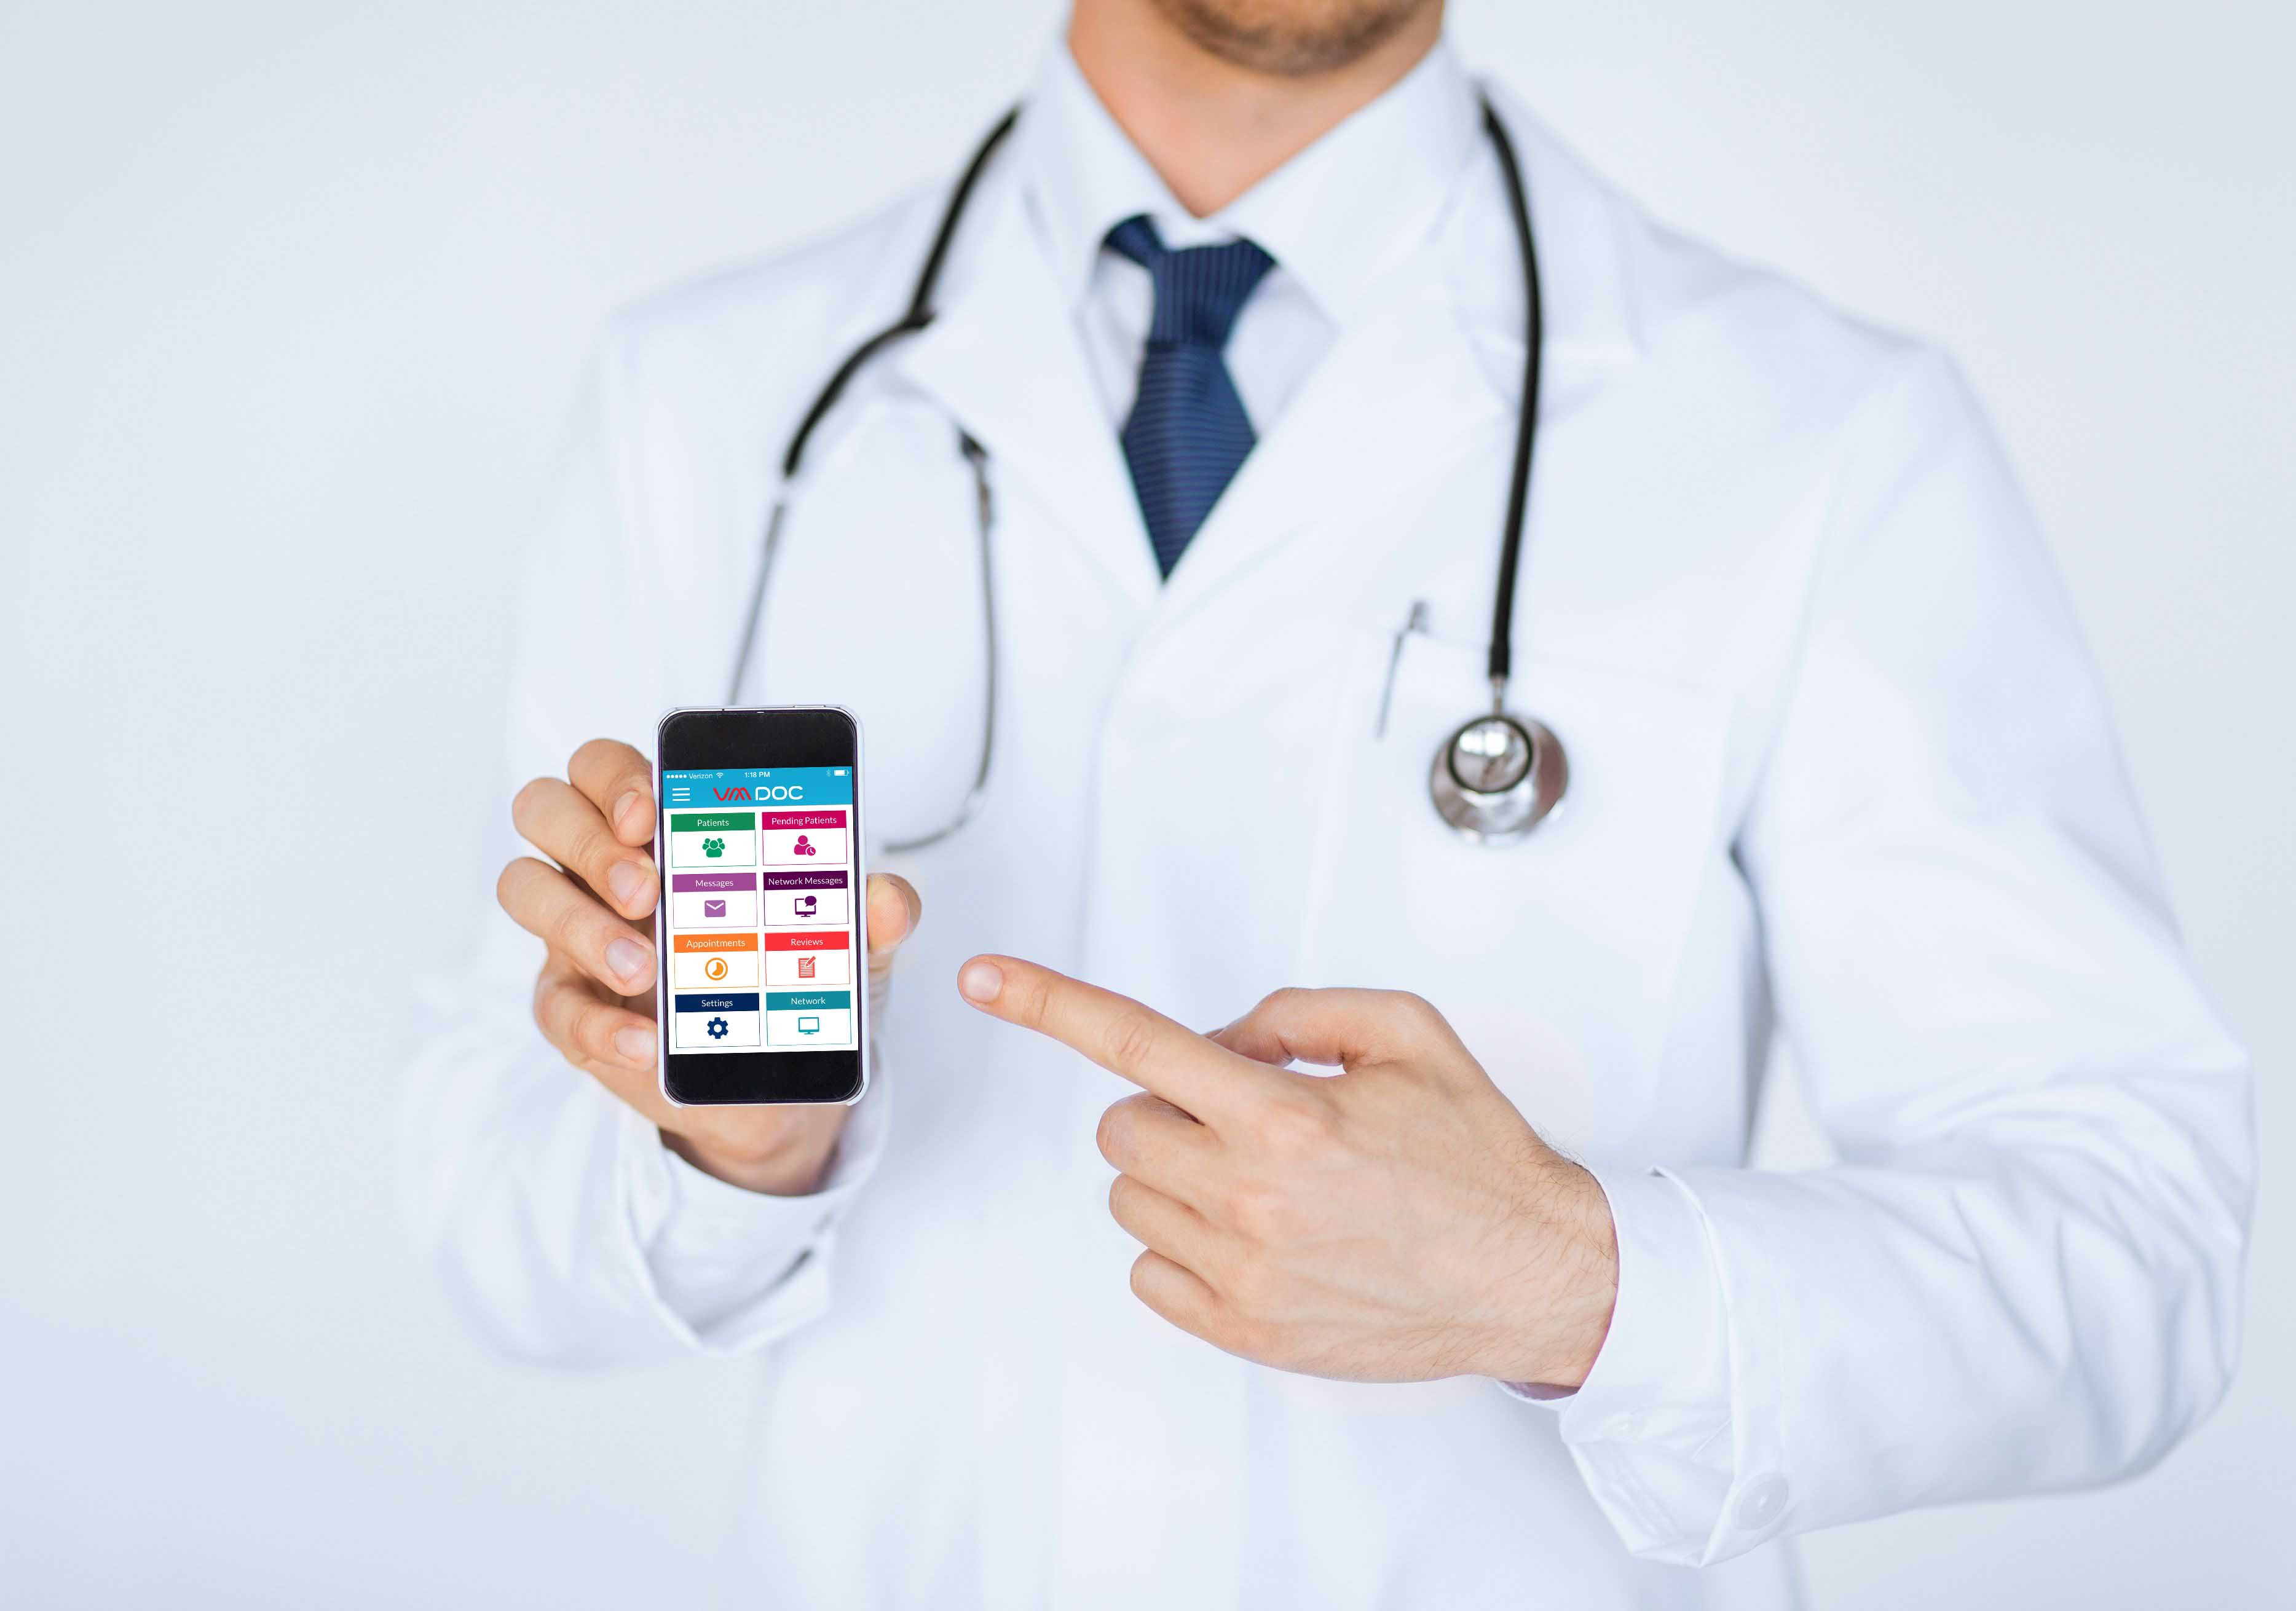 Mobile application will change the lives of people suffering from various diseases